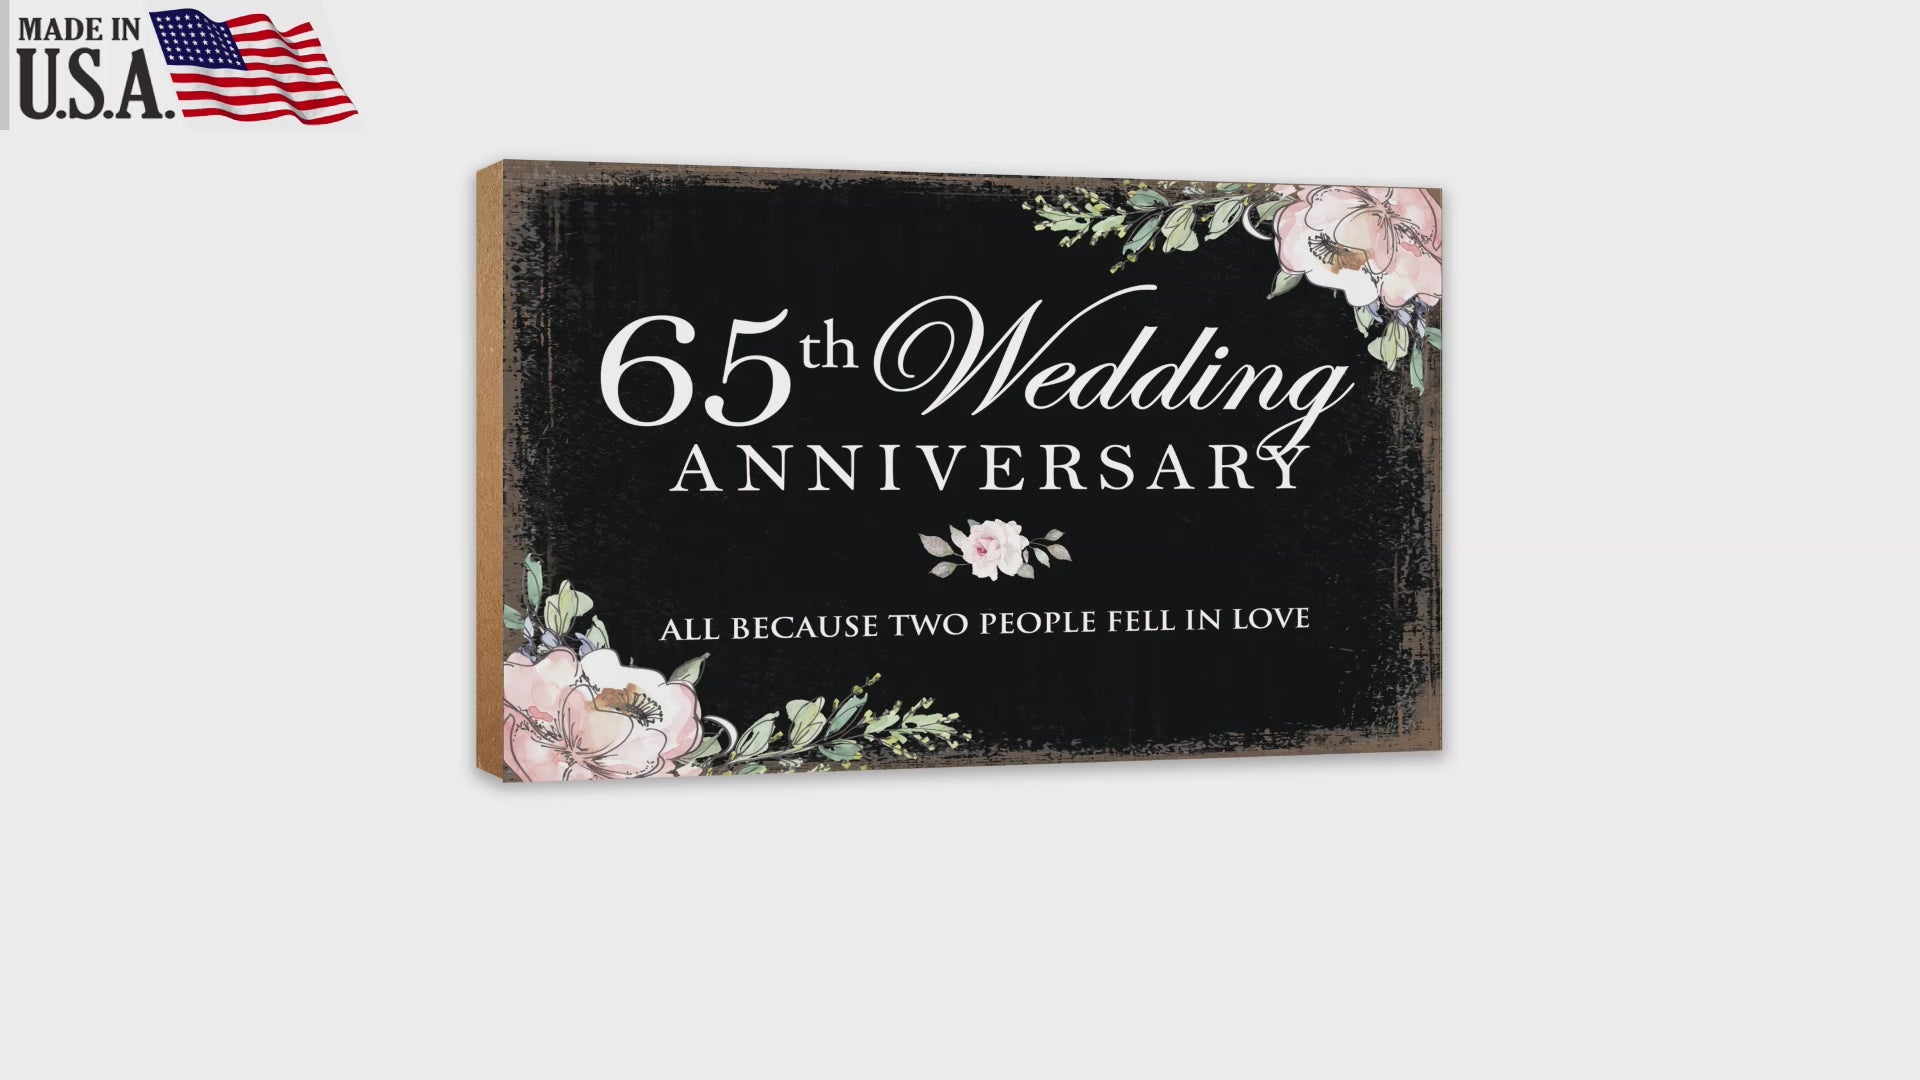 65th Wedding Anniversary Unique Shelf Decor and Tabletop Signs Gift for Couples - Fell In Love